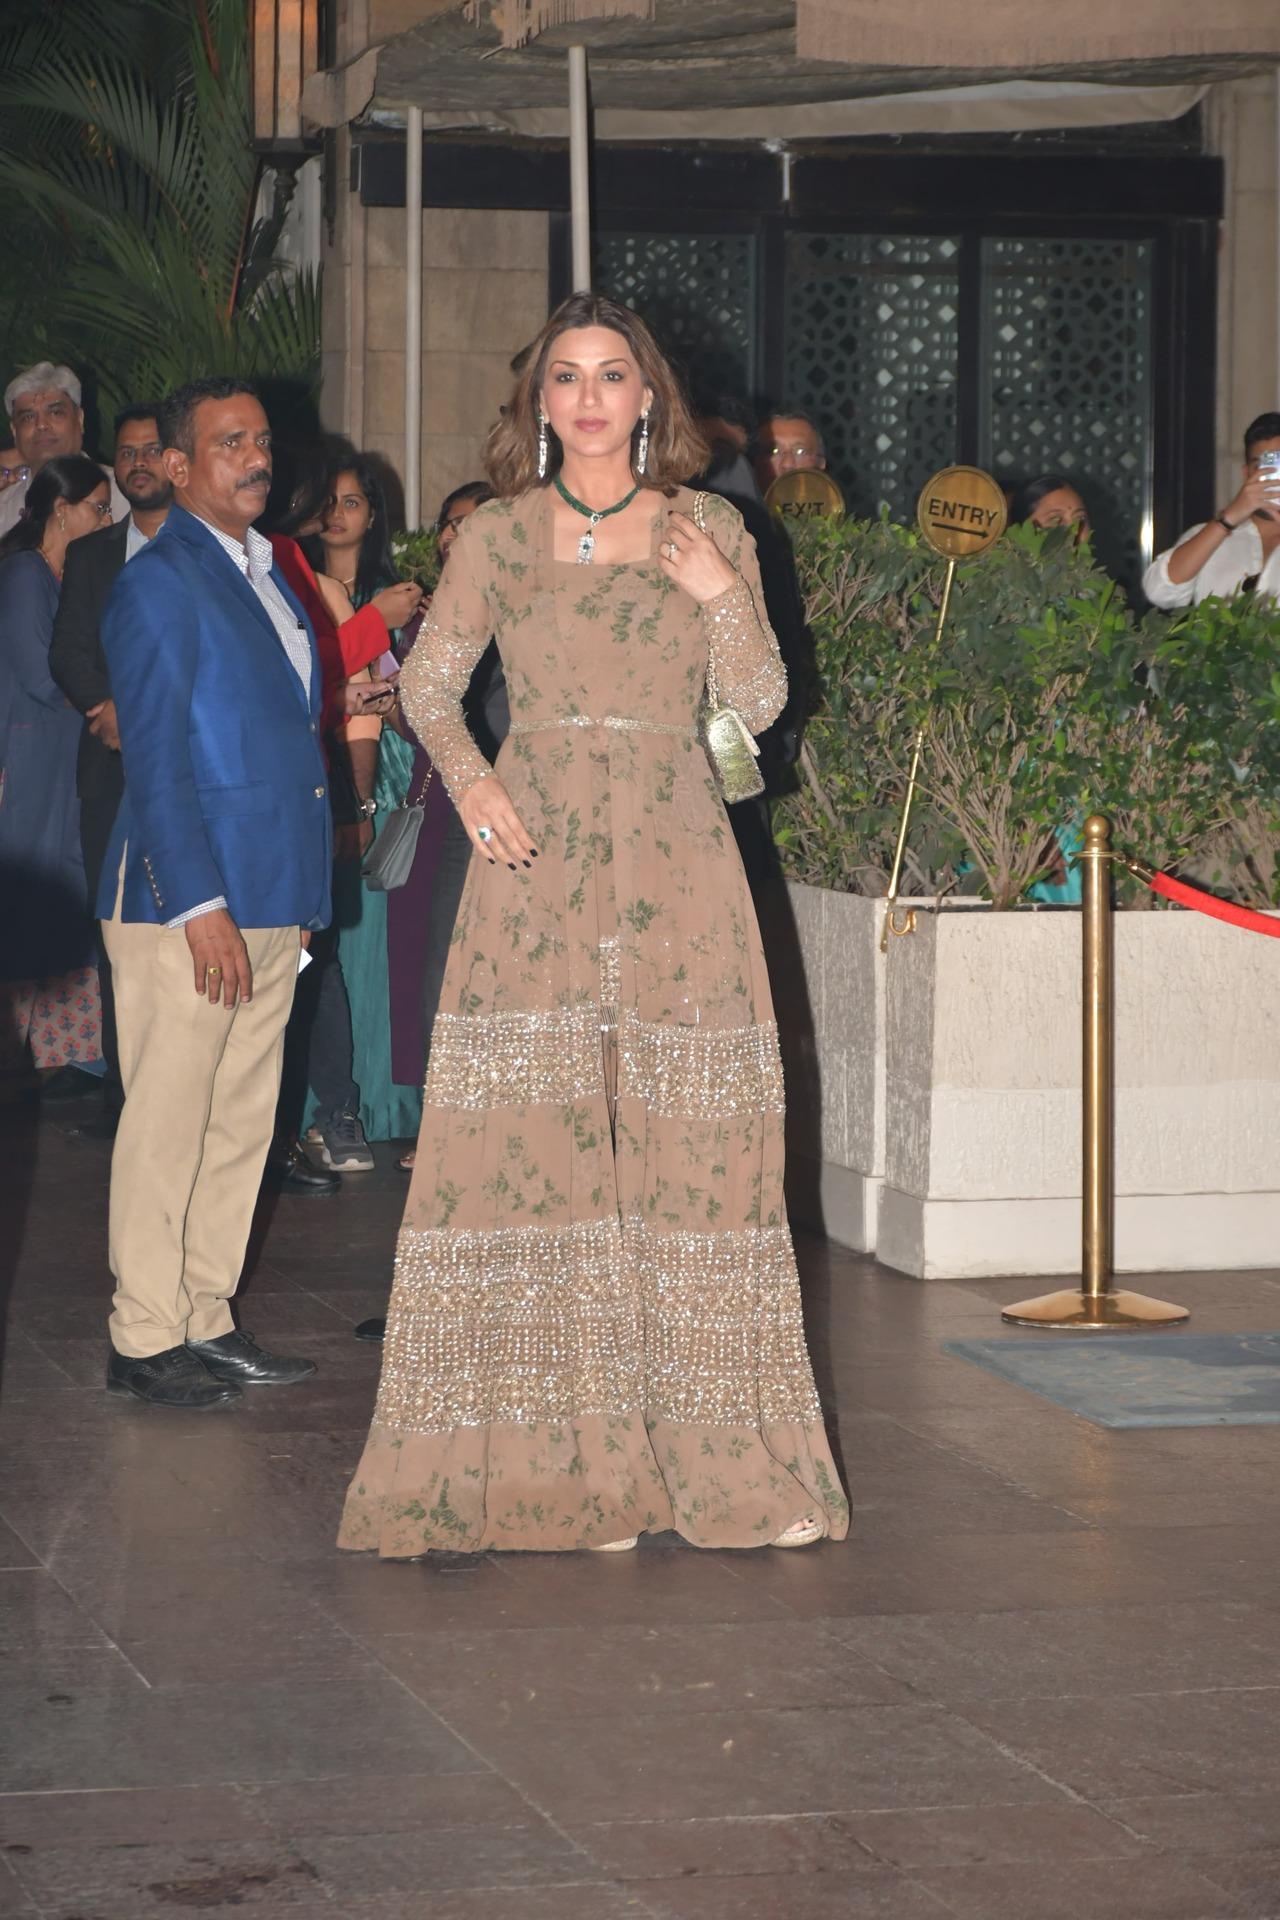 Sonali Bendre also looked stunning in a brown traditional attire for the reception